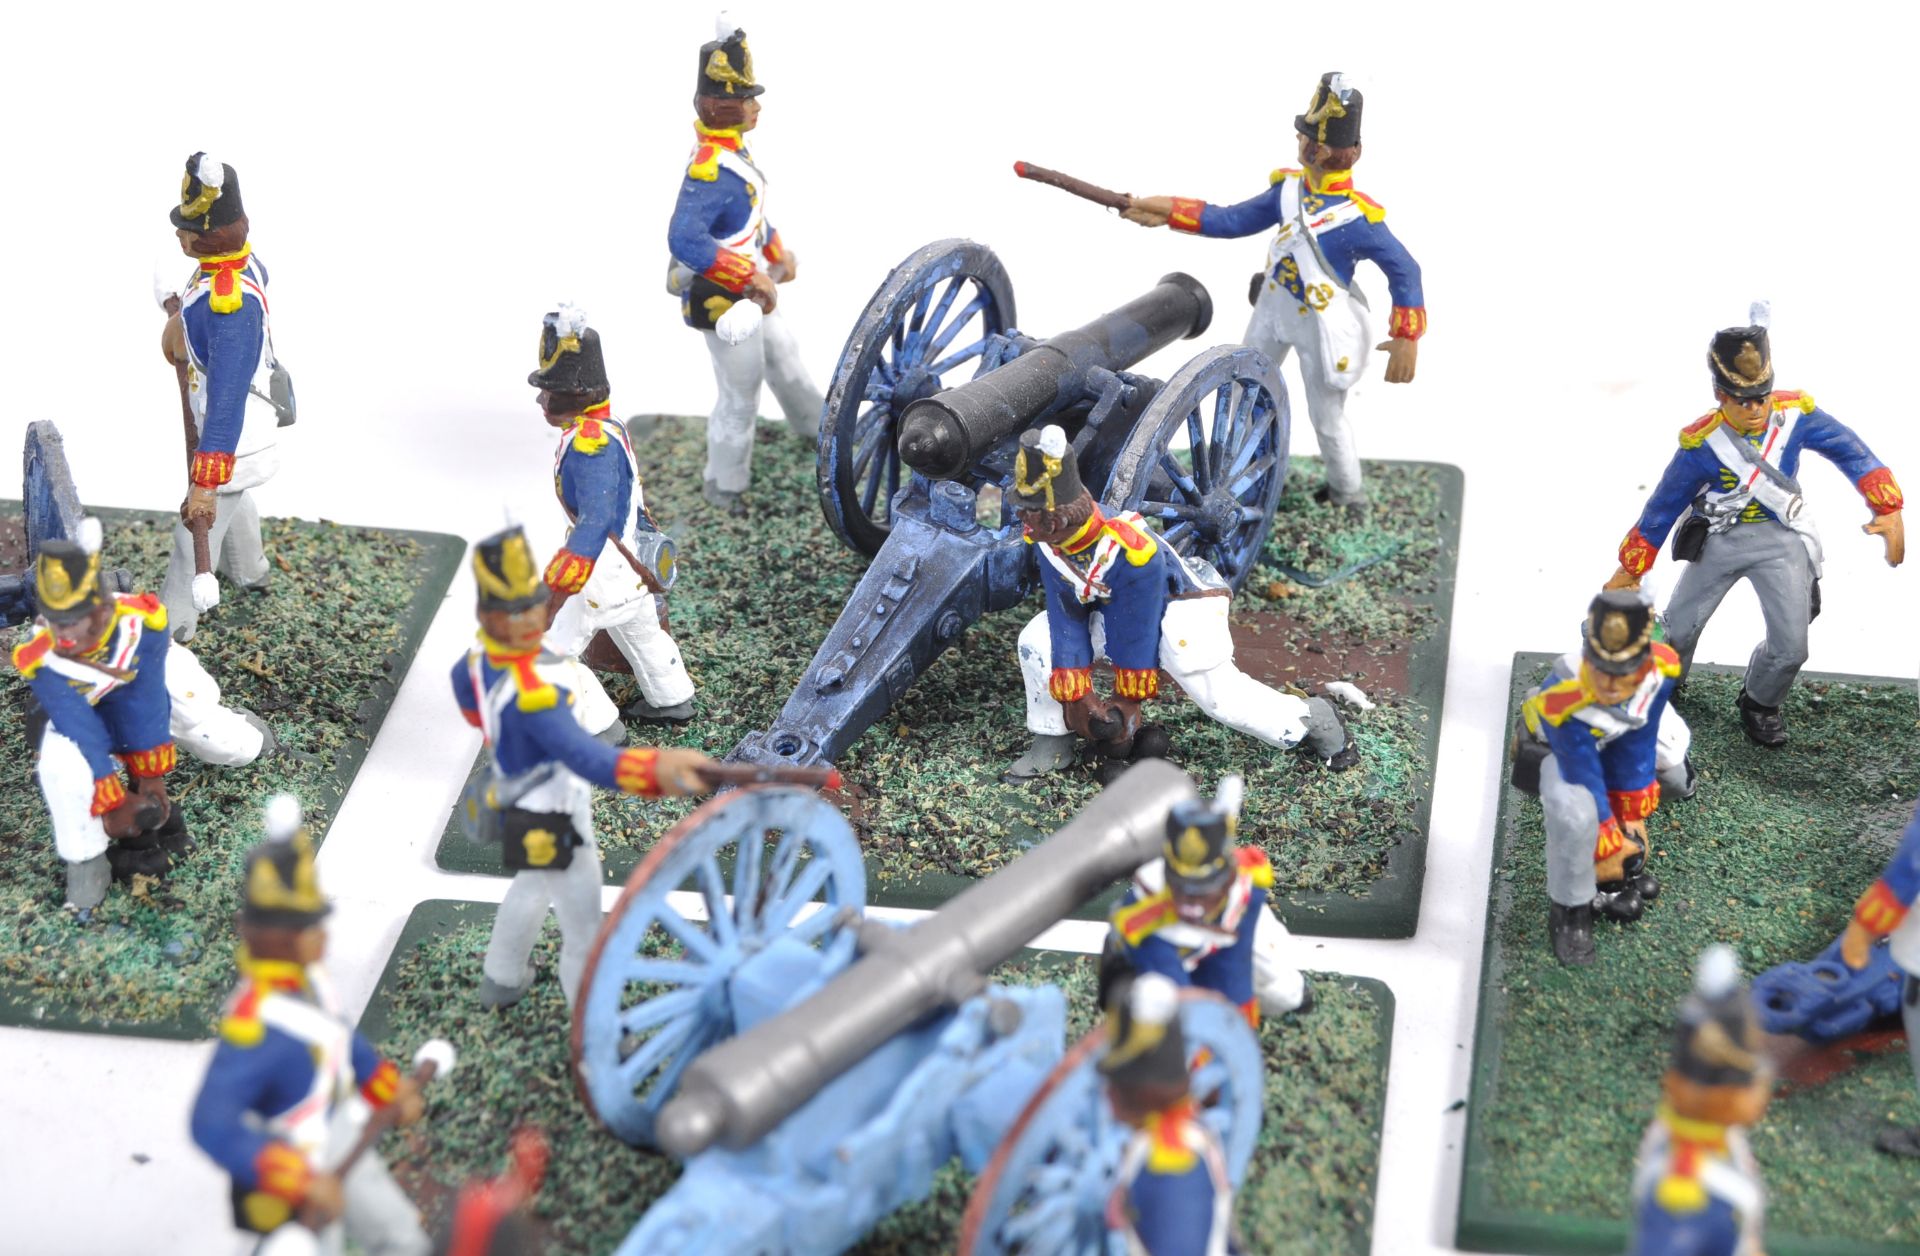 COLLECTION OF 1/32 SCALE PLASTIC NAPOLEONIC SOLDIER FIGURES - Image 5 of 5